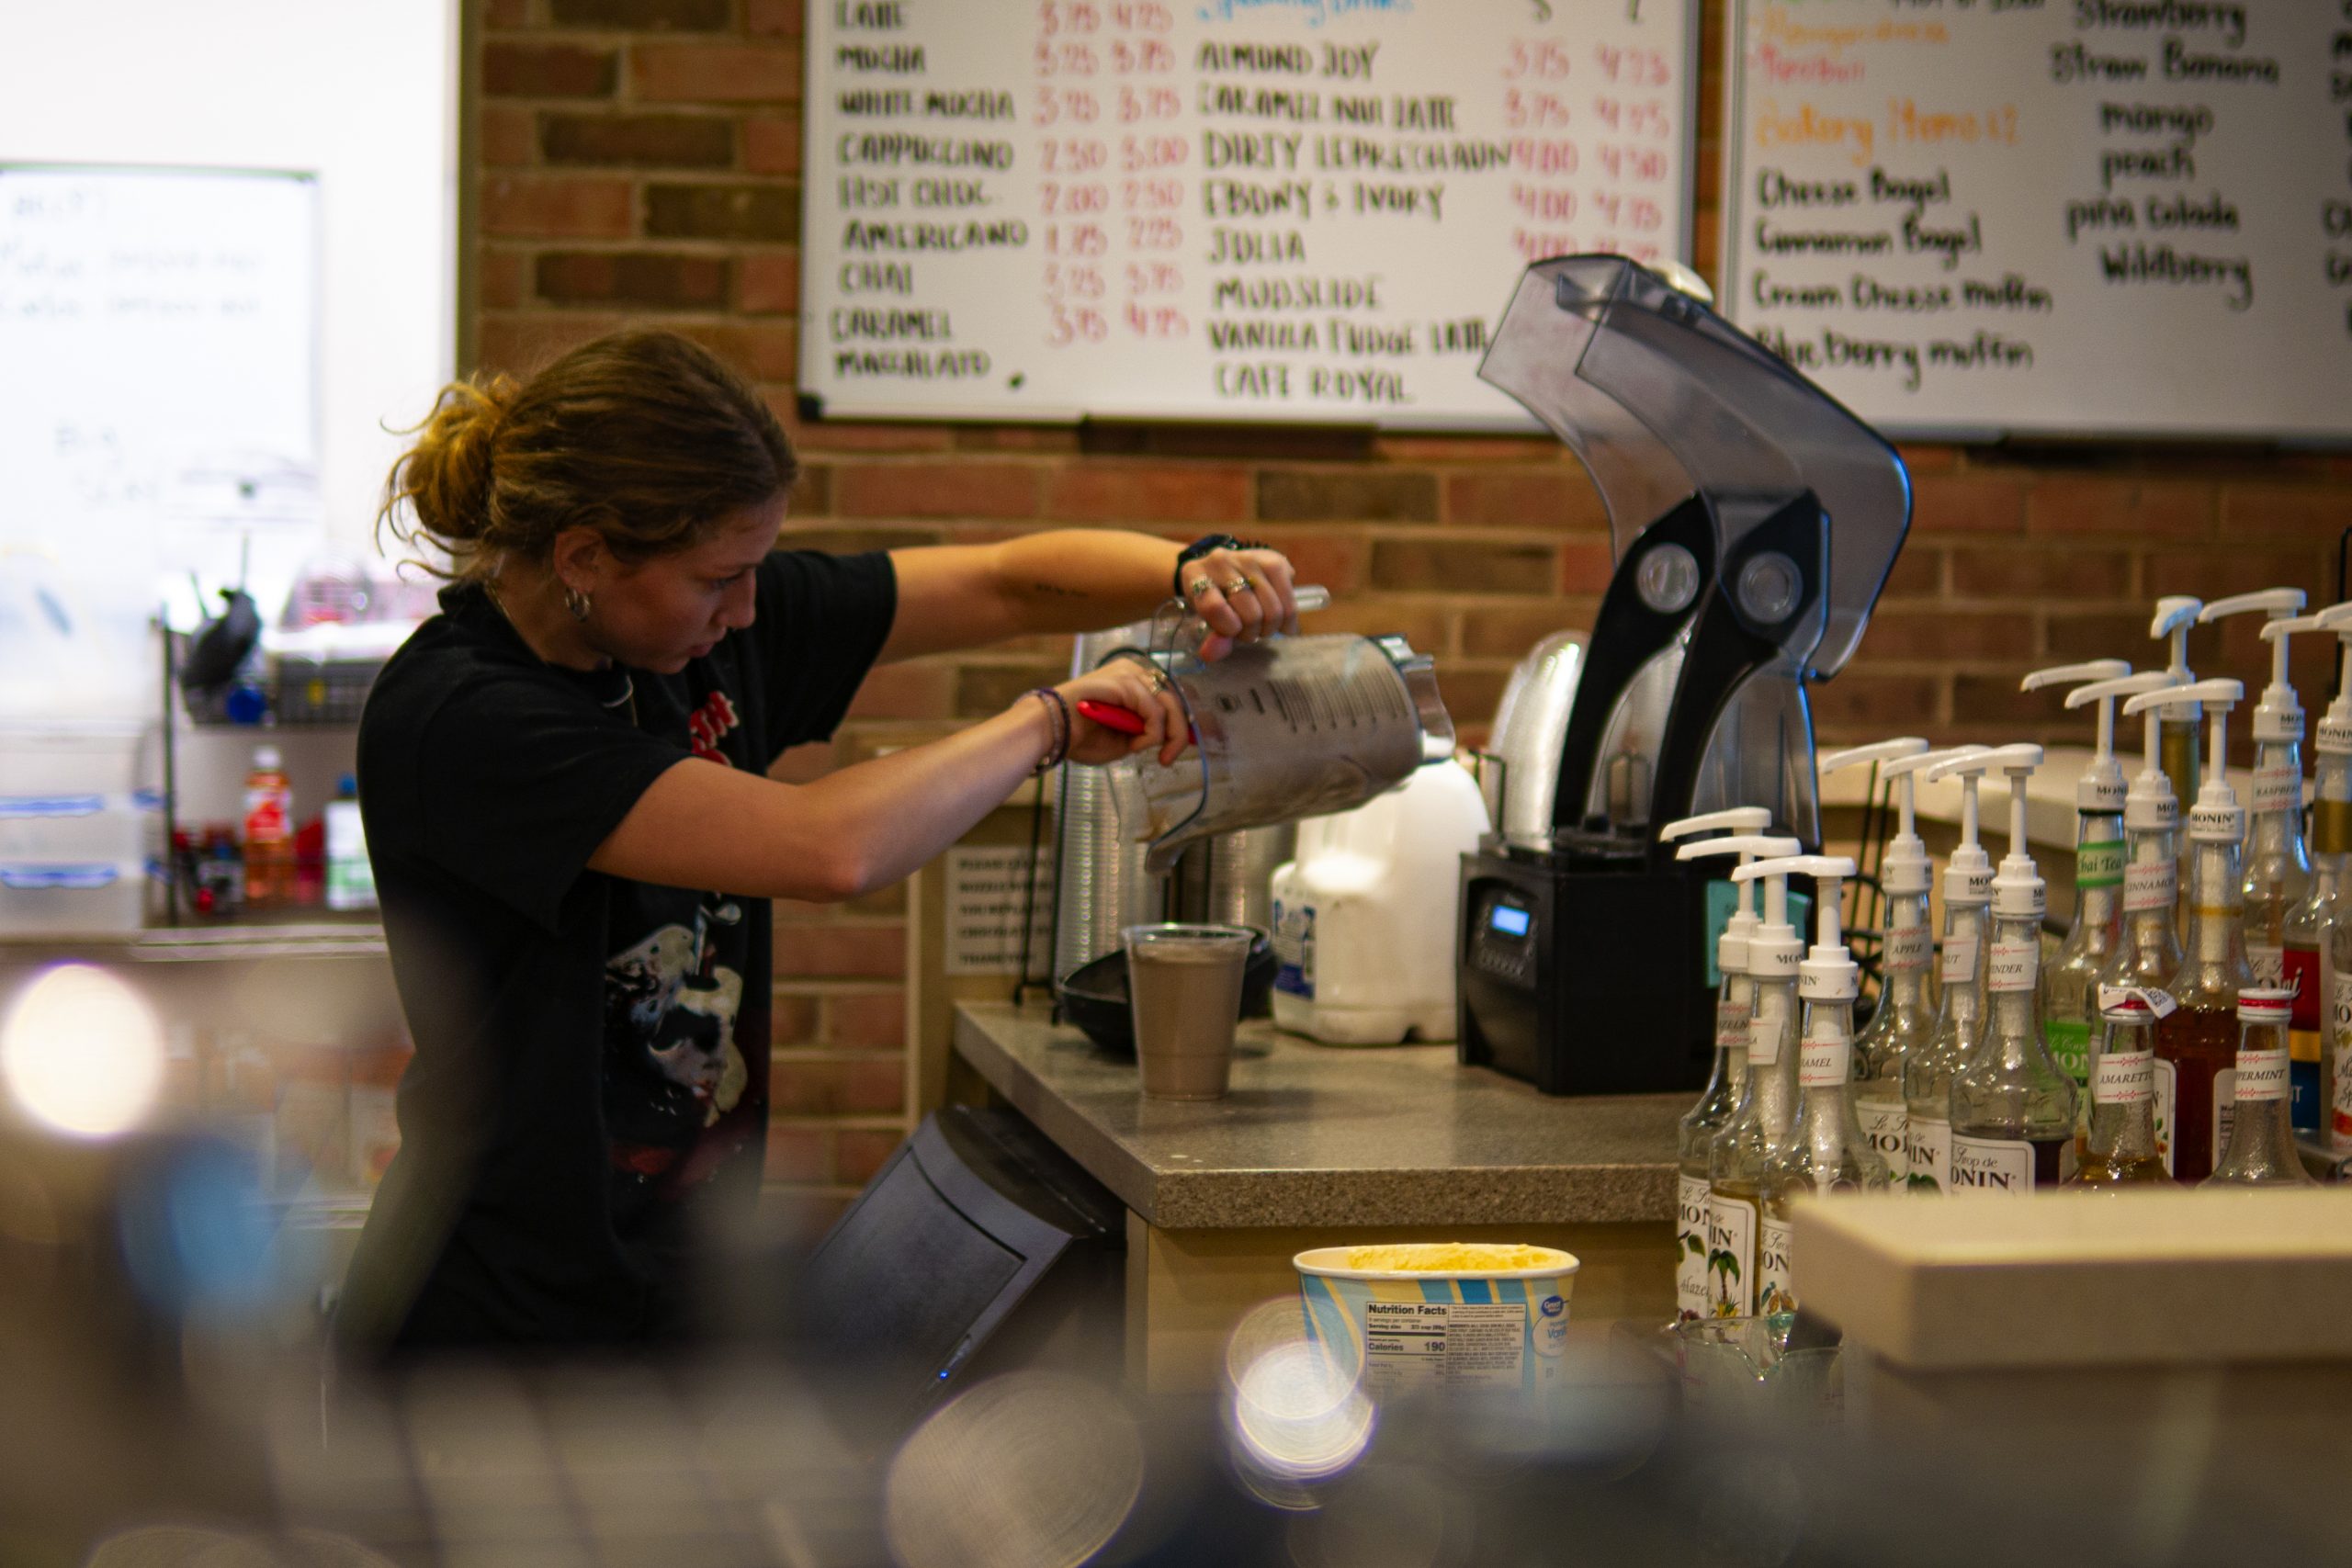 A Java Junction barista scrapes the remains of a milkshake out of a blender during a shift